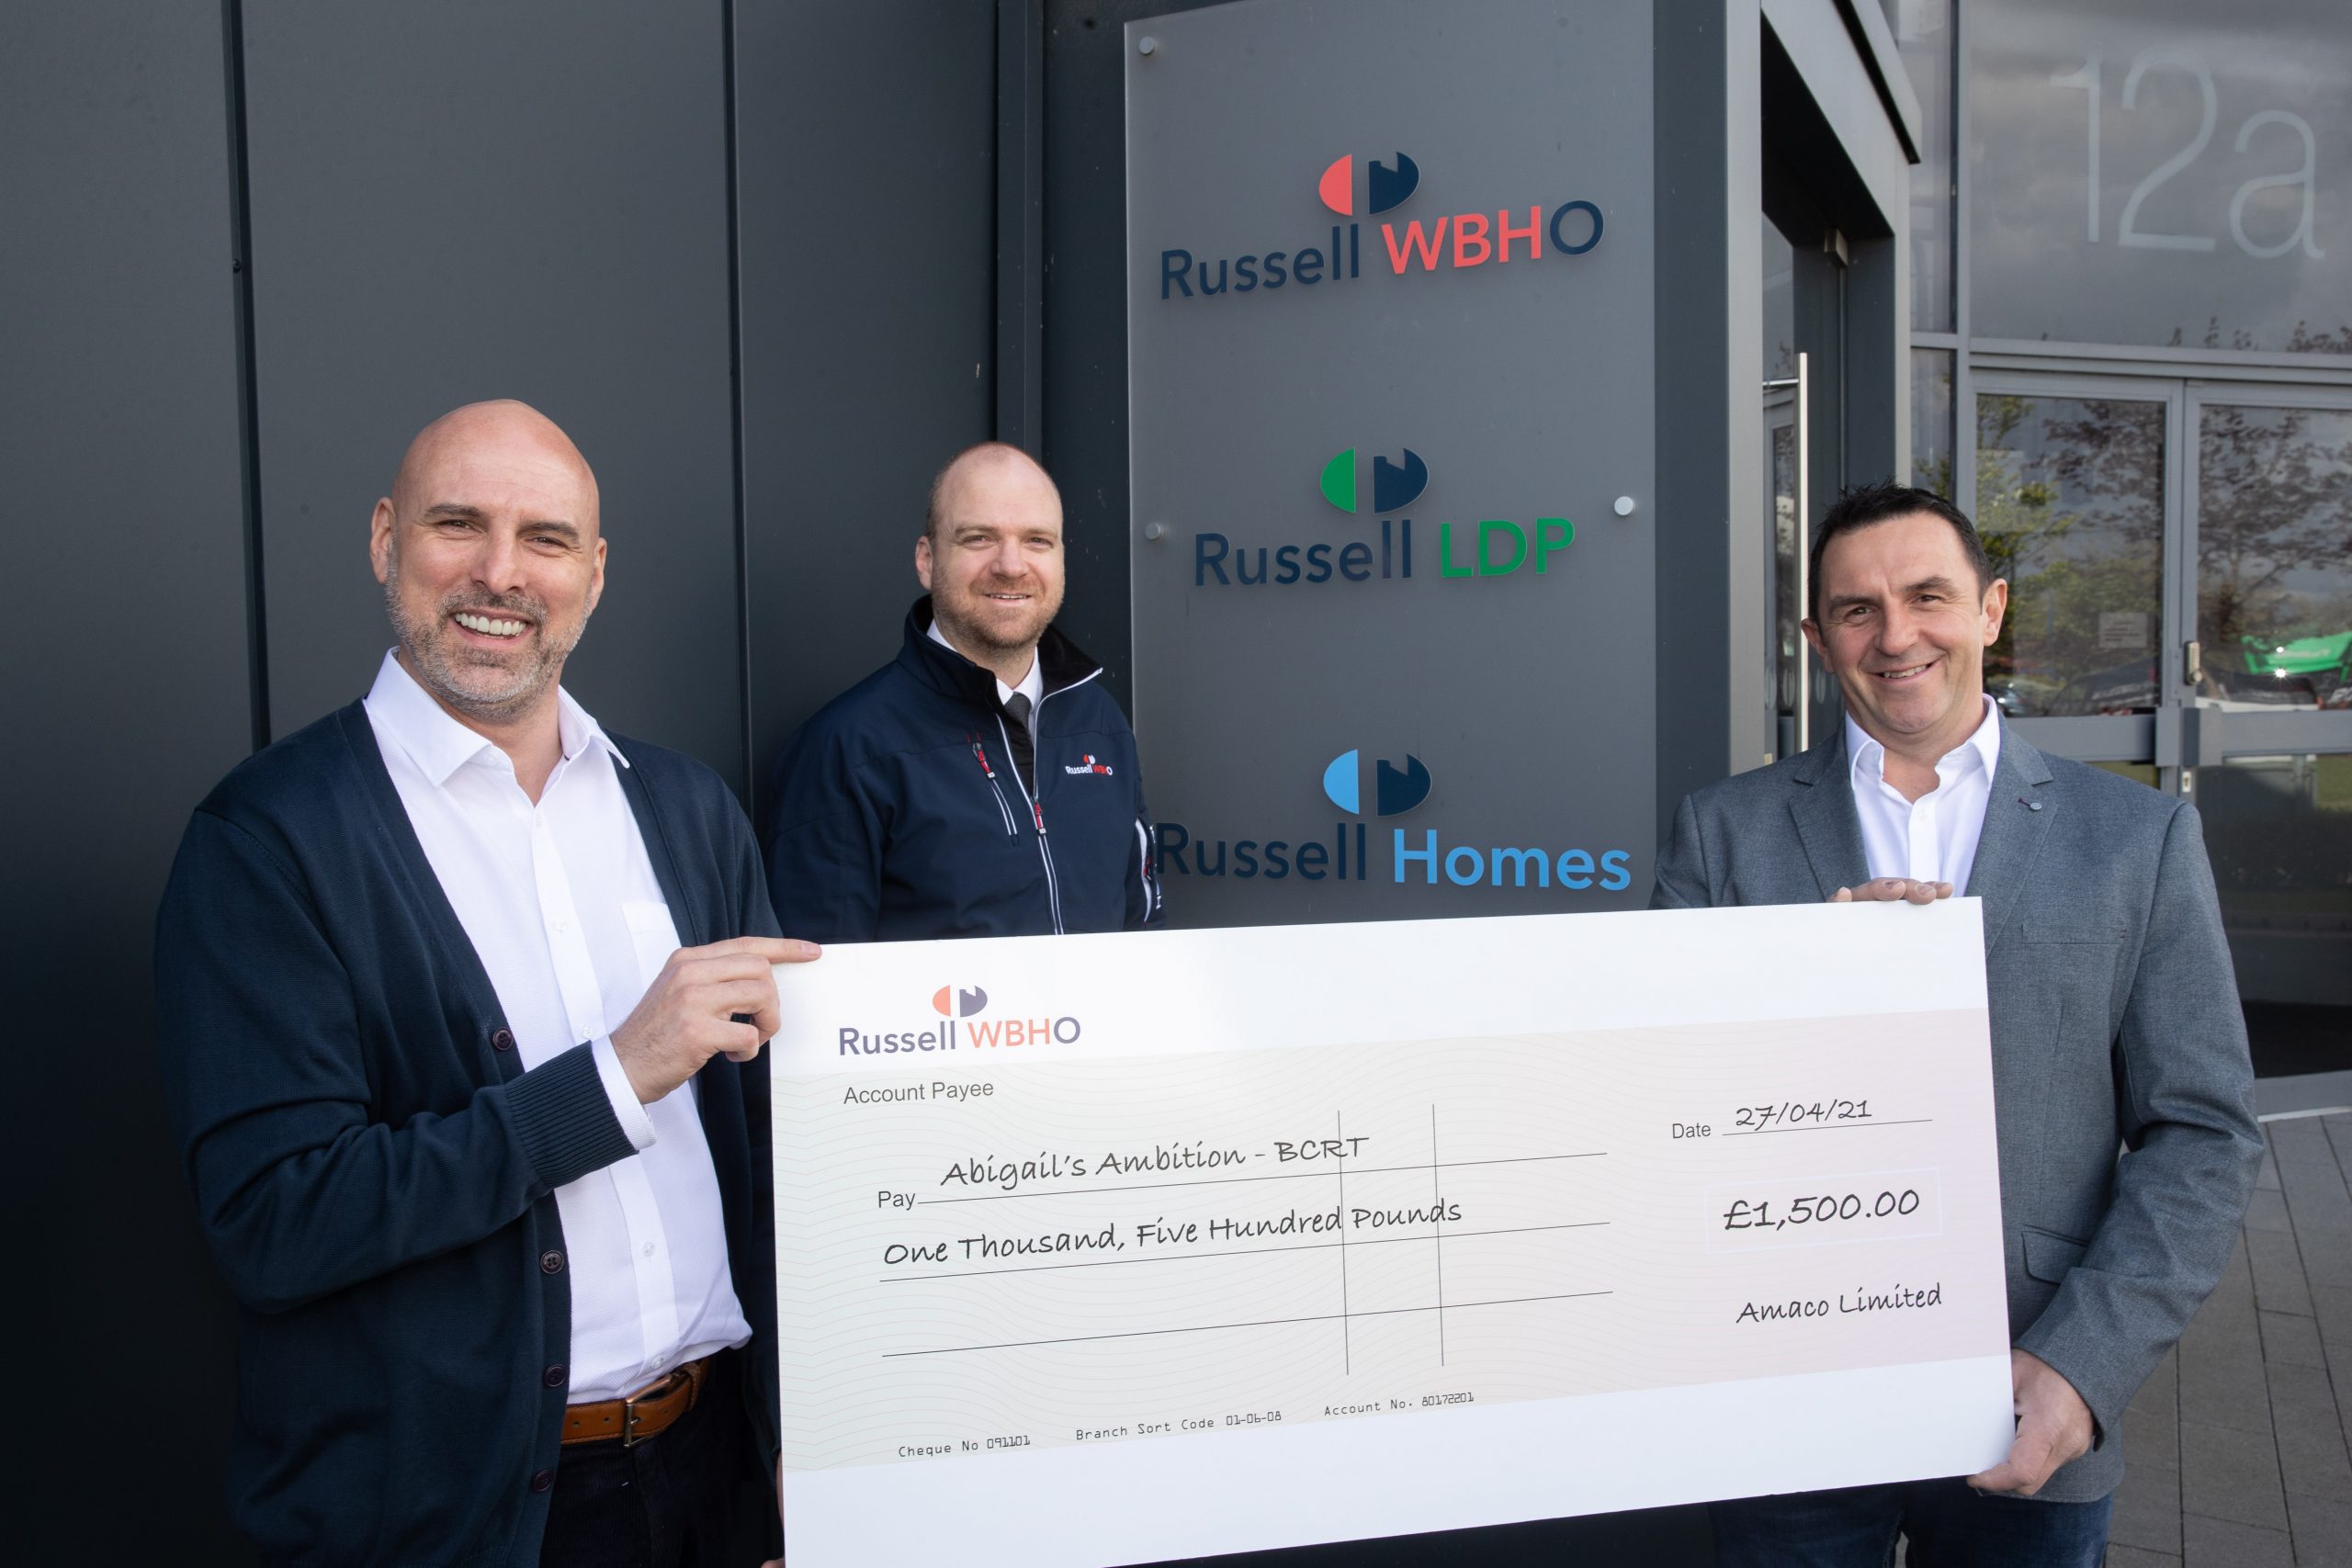 Amaco Vending directors present cheque to RussellWBHO